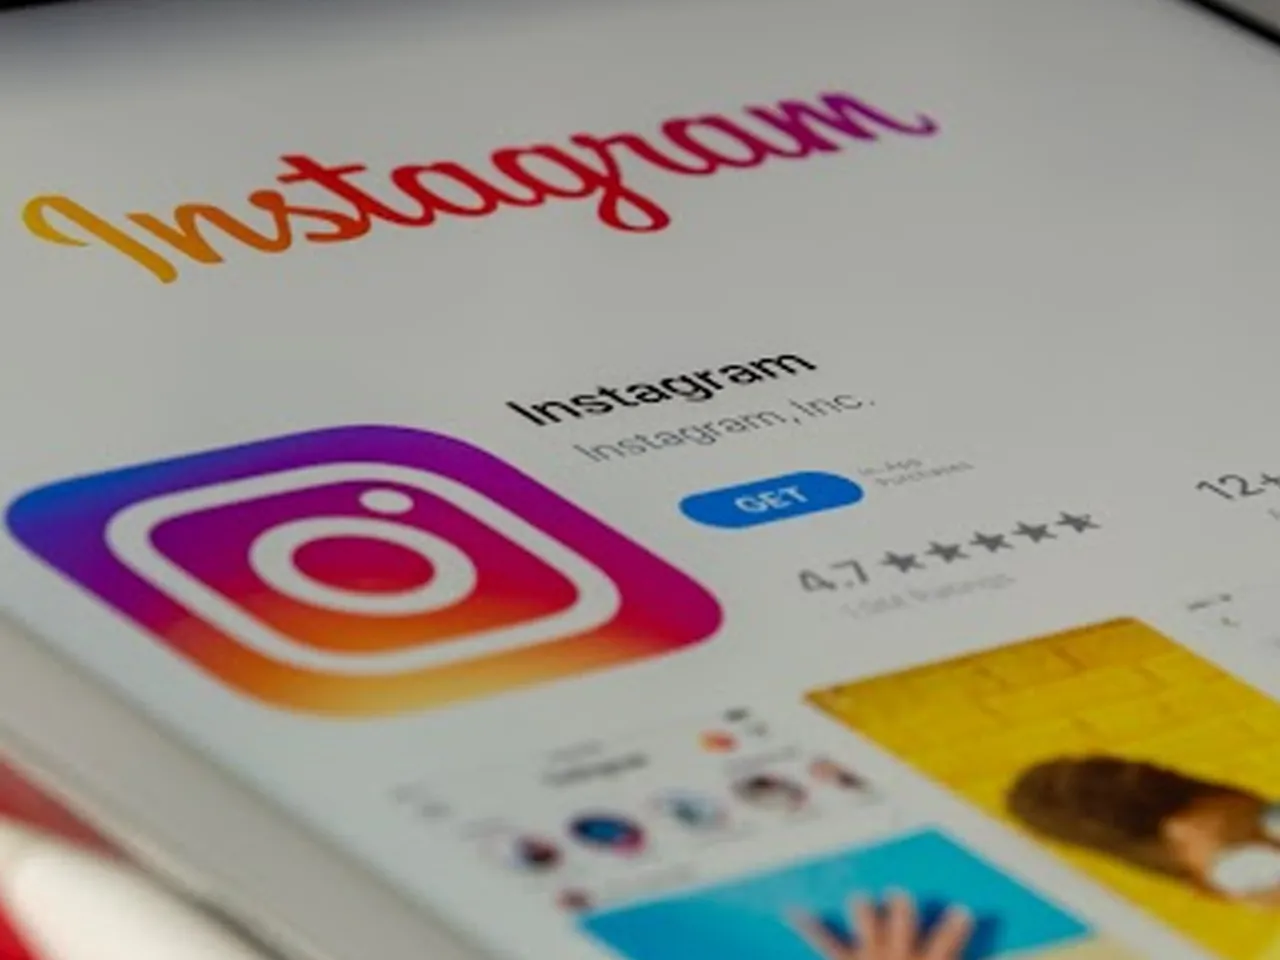 Instagram’s new AI-powered editing tool 